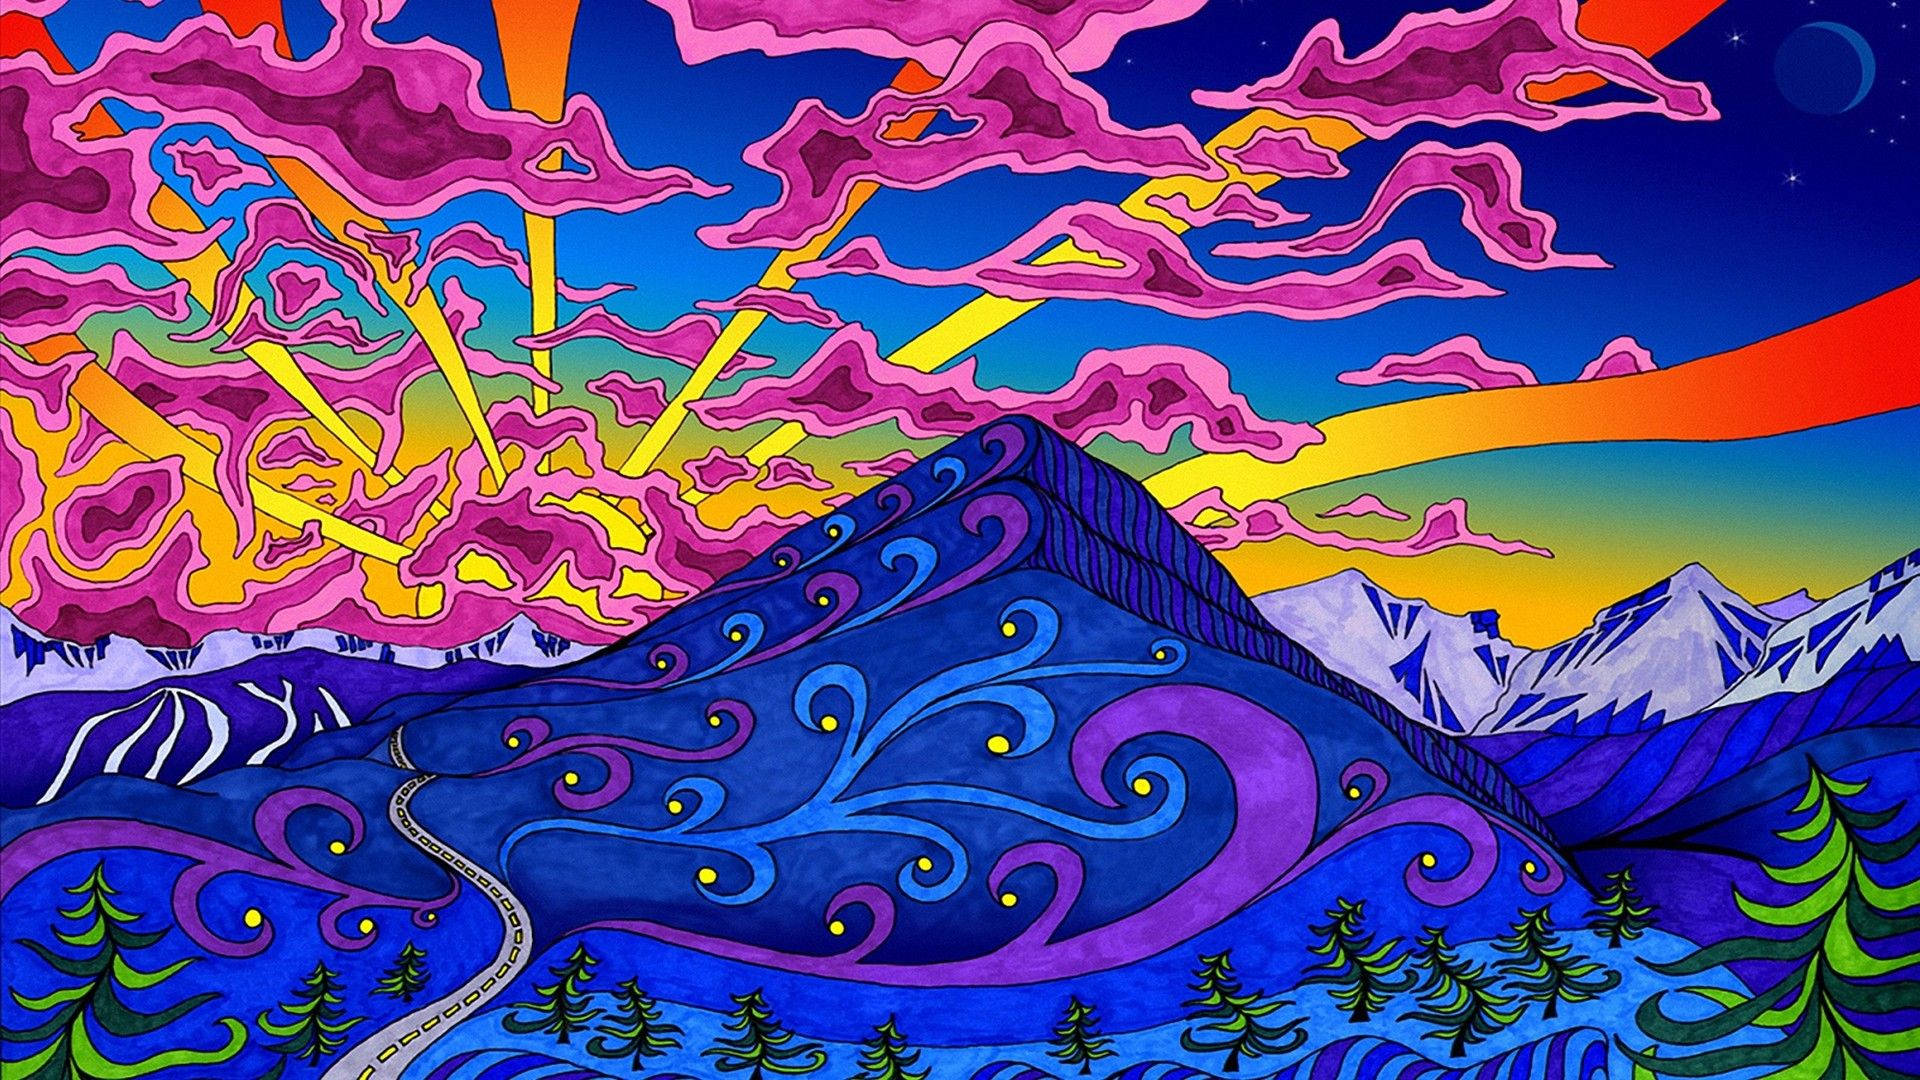 Psychedelic Mountain Art Laptop Background